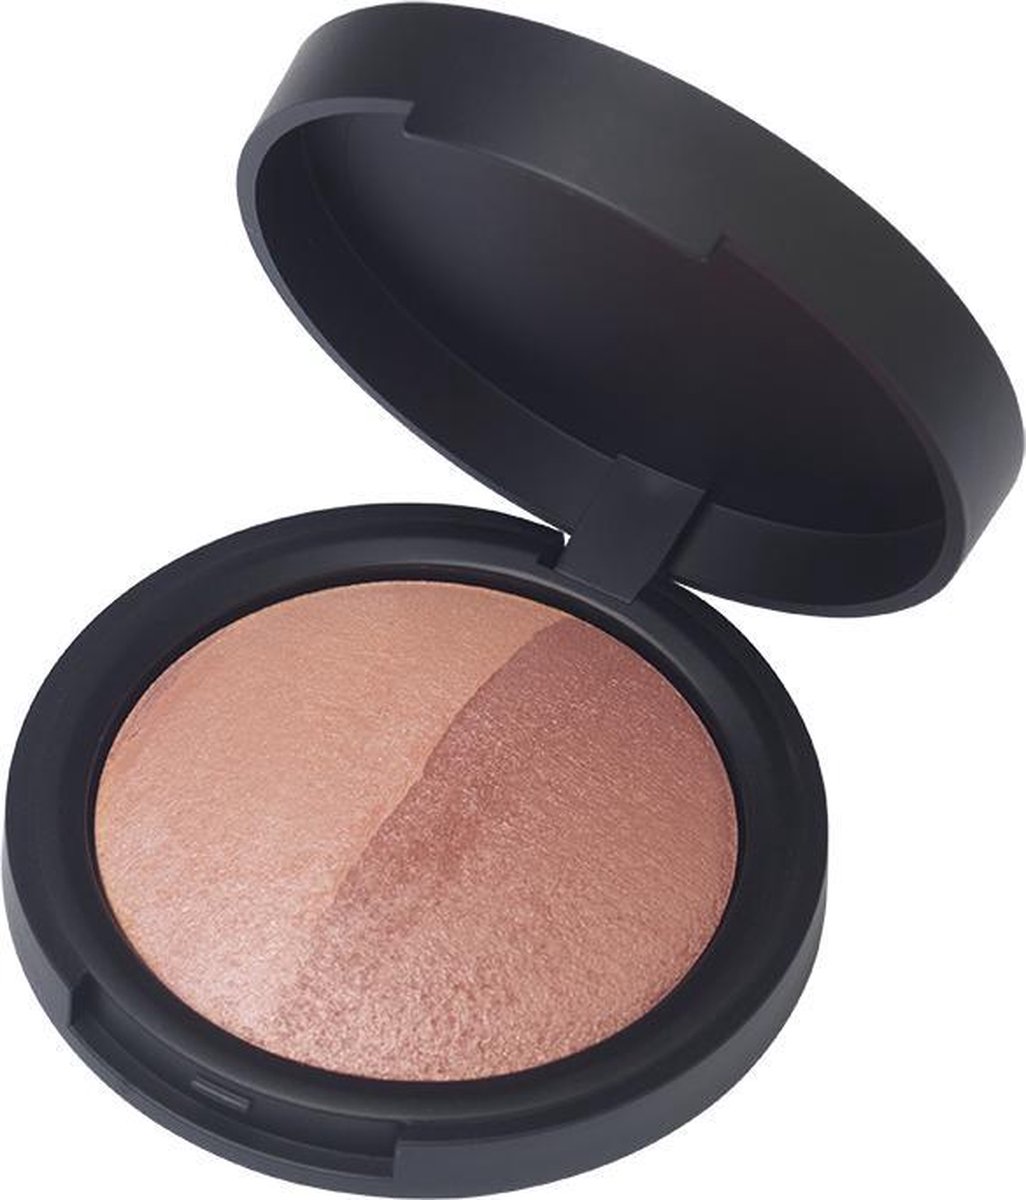 Aden Cosmetics Teracotta Baked Blusher Duo